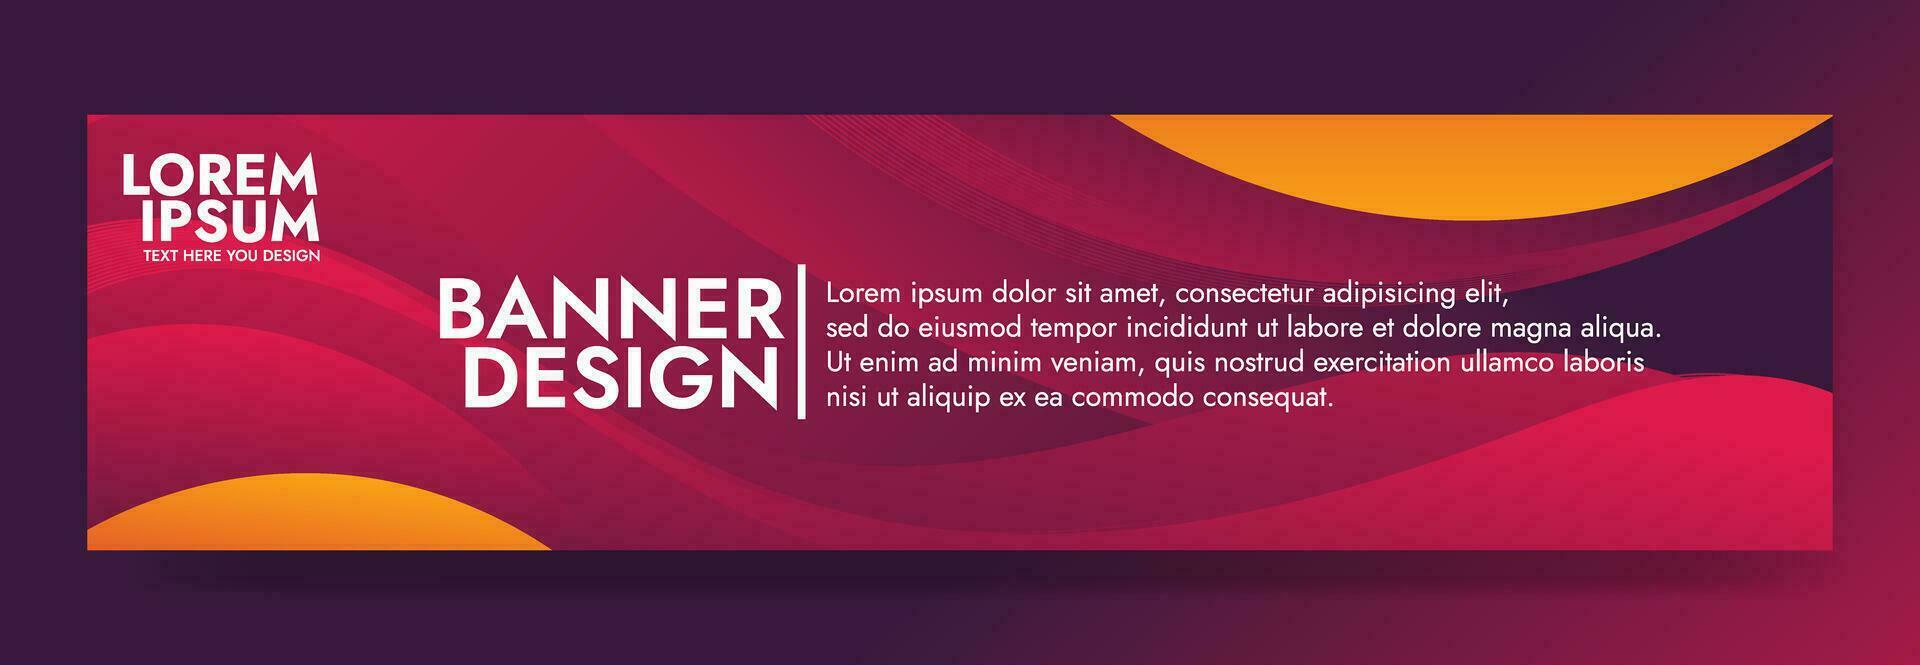 Abstract  red banner color with a unique wavy design. It is ideal for creating eye catching headers, promotional banners, and graphic elements with a modern and dynamic look. vector